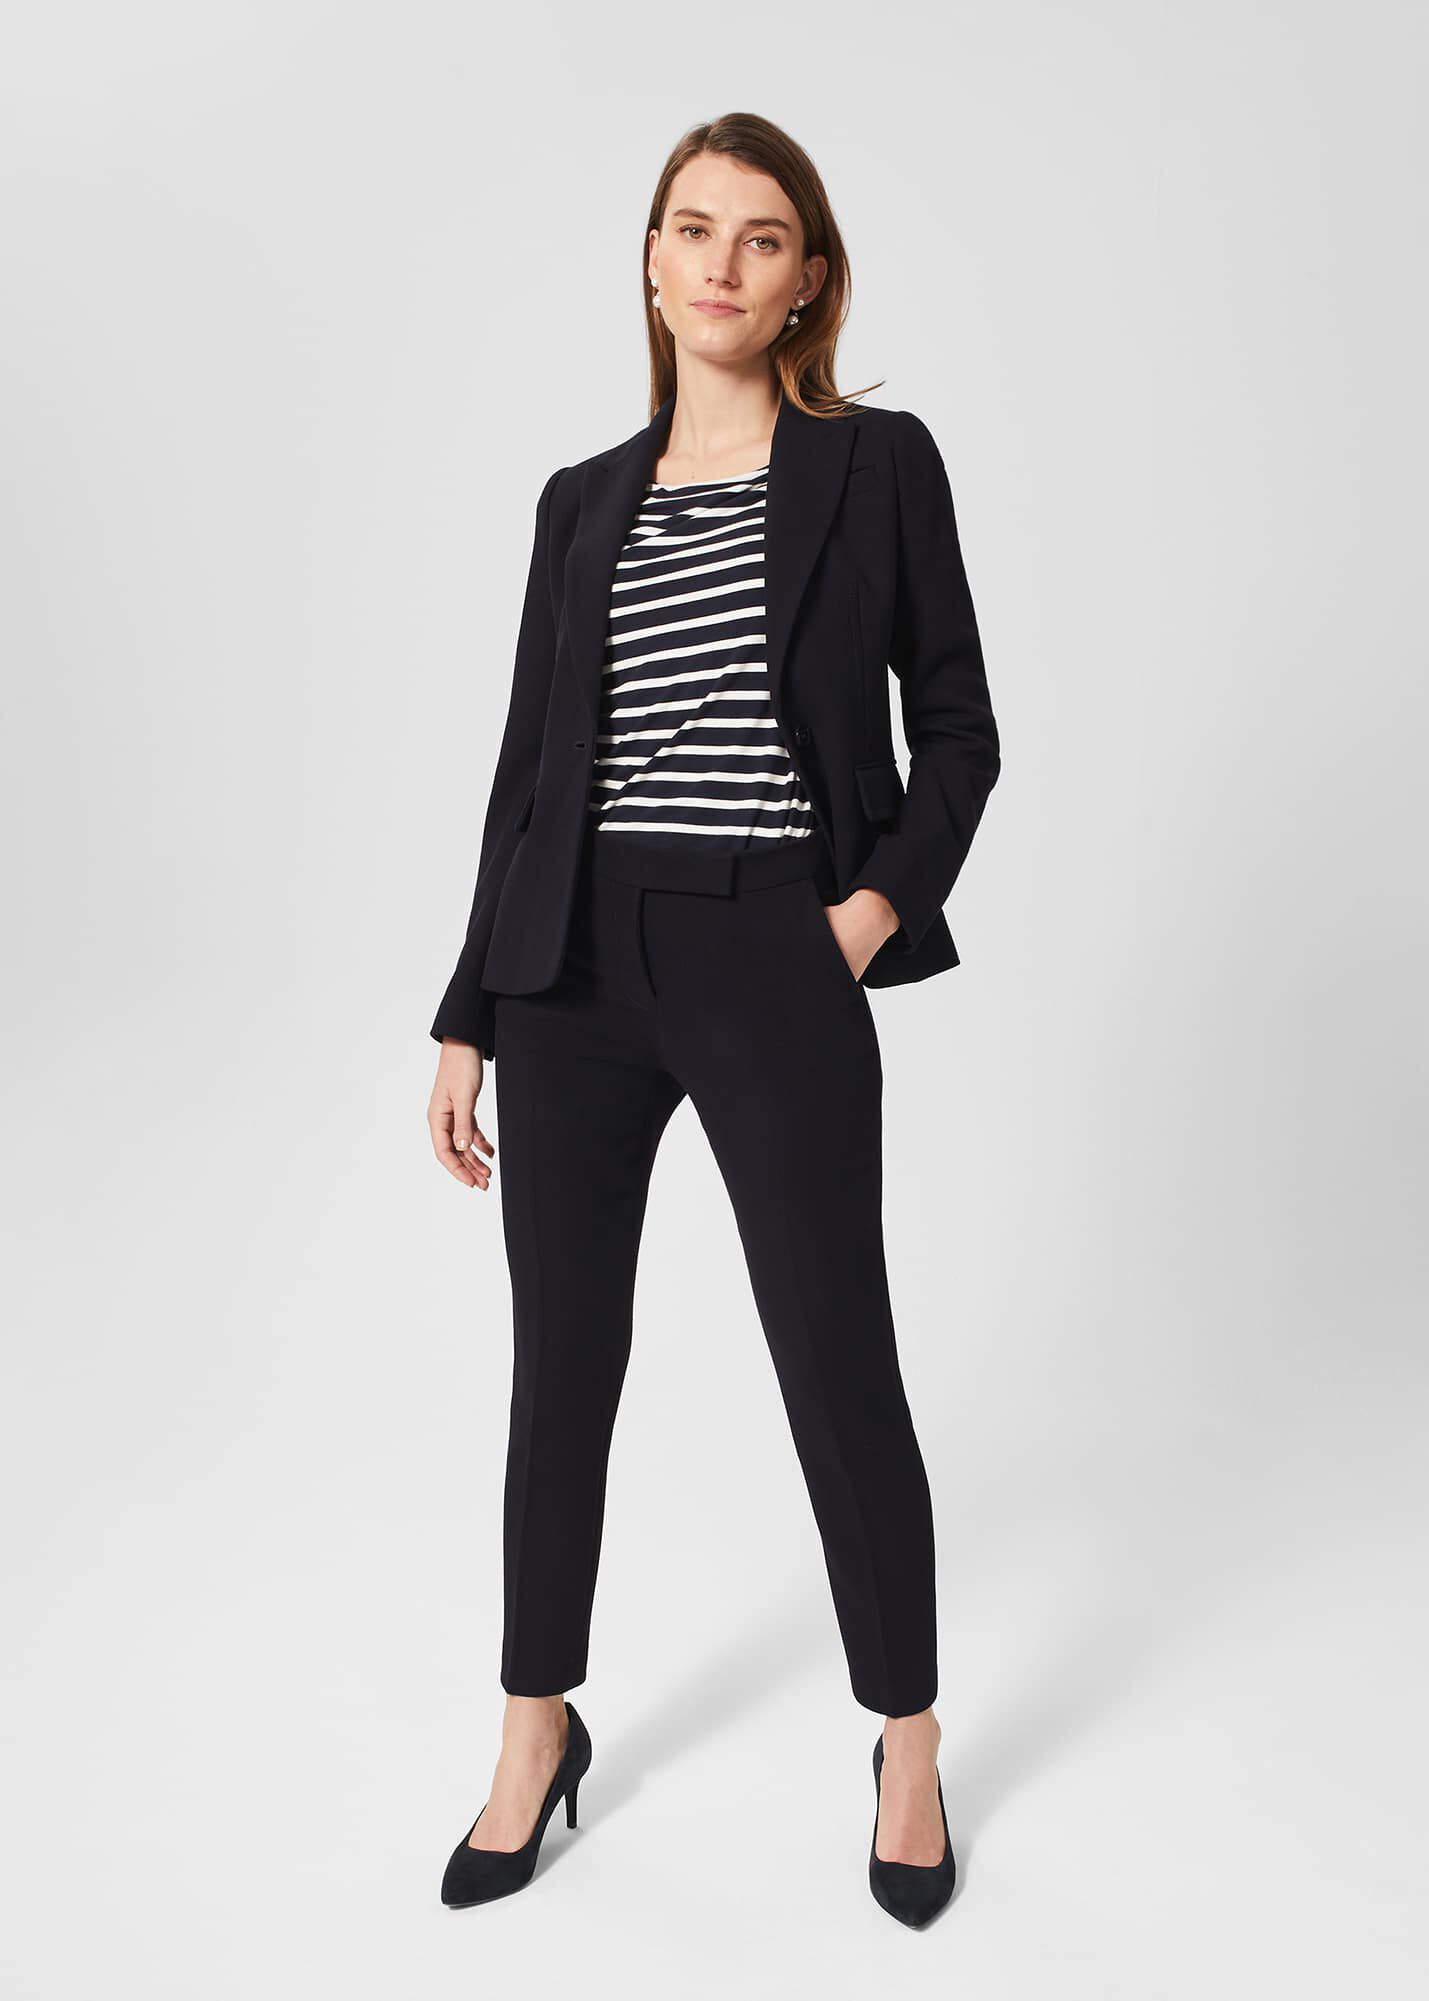 Women's Trouser Suits For Special Occasions | boohoo UK